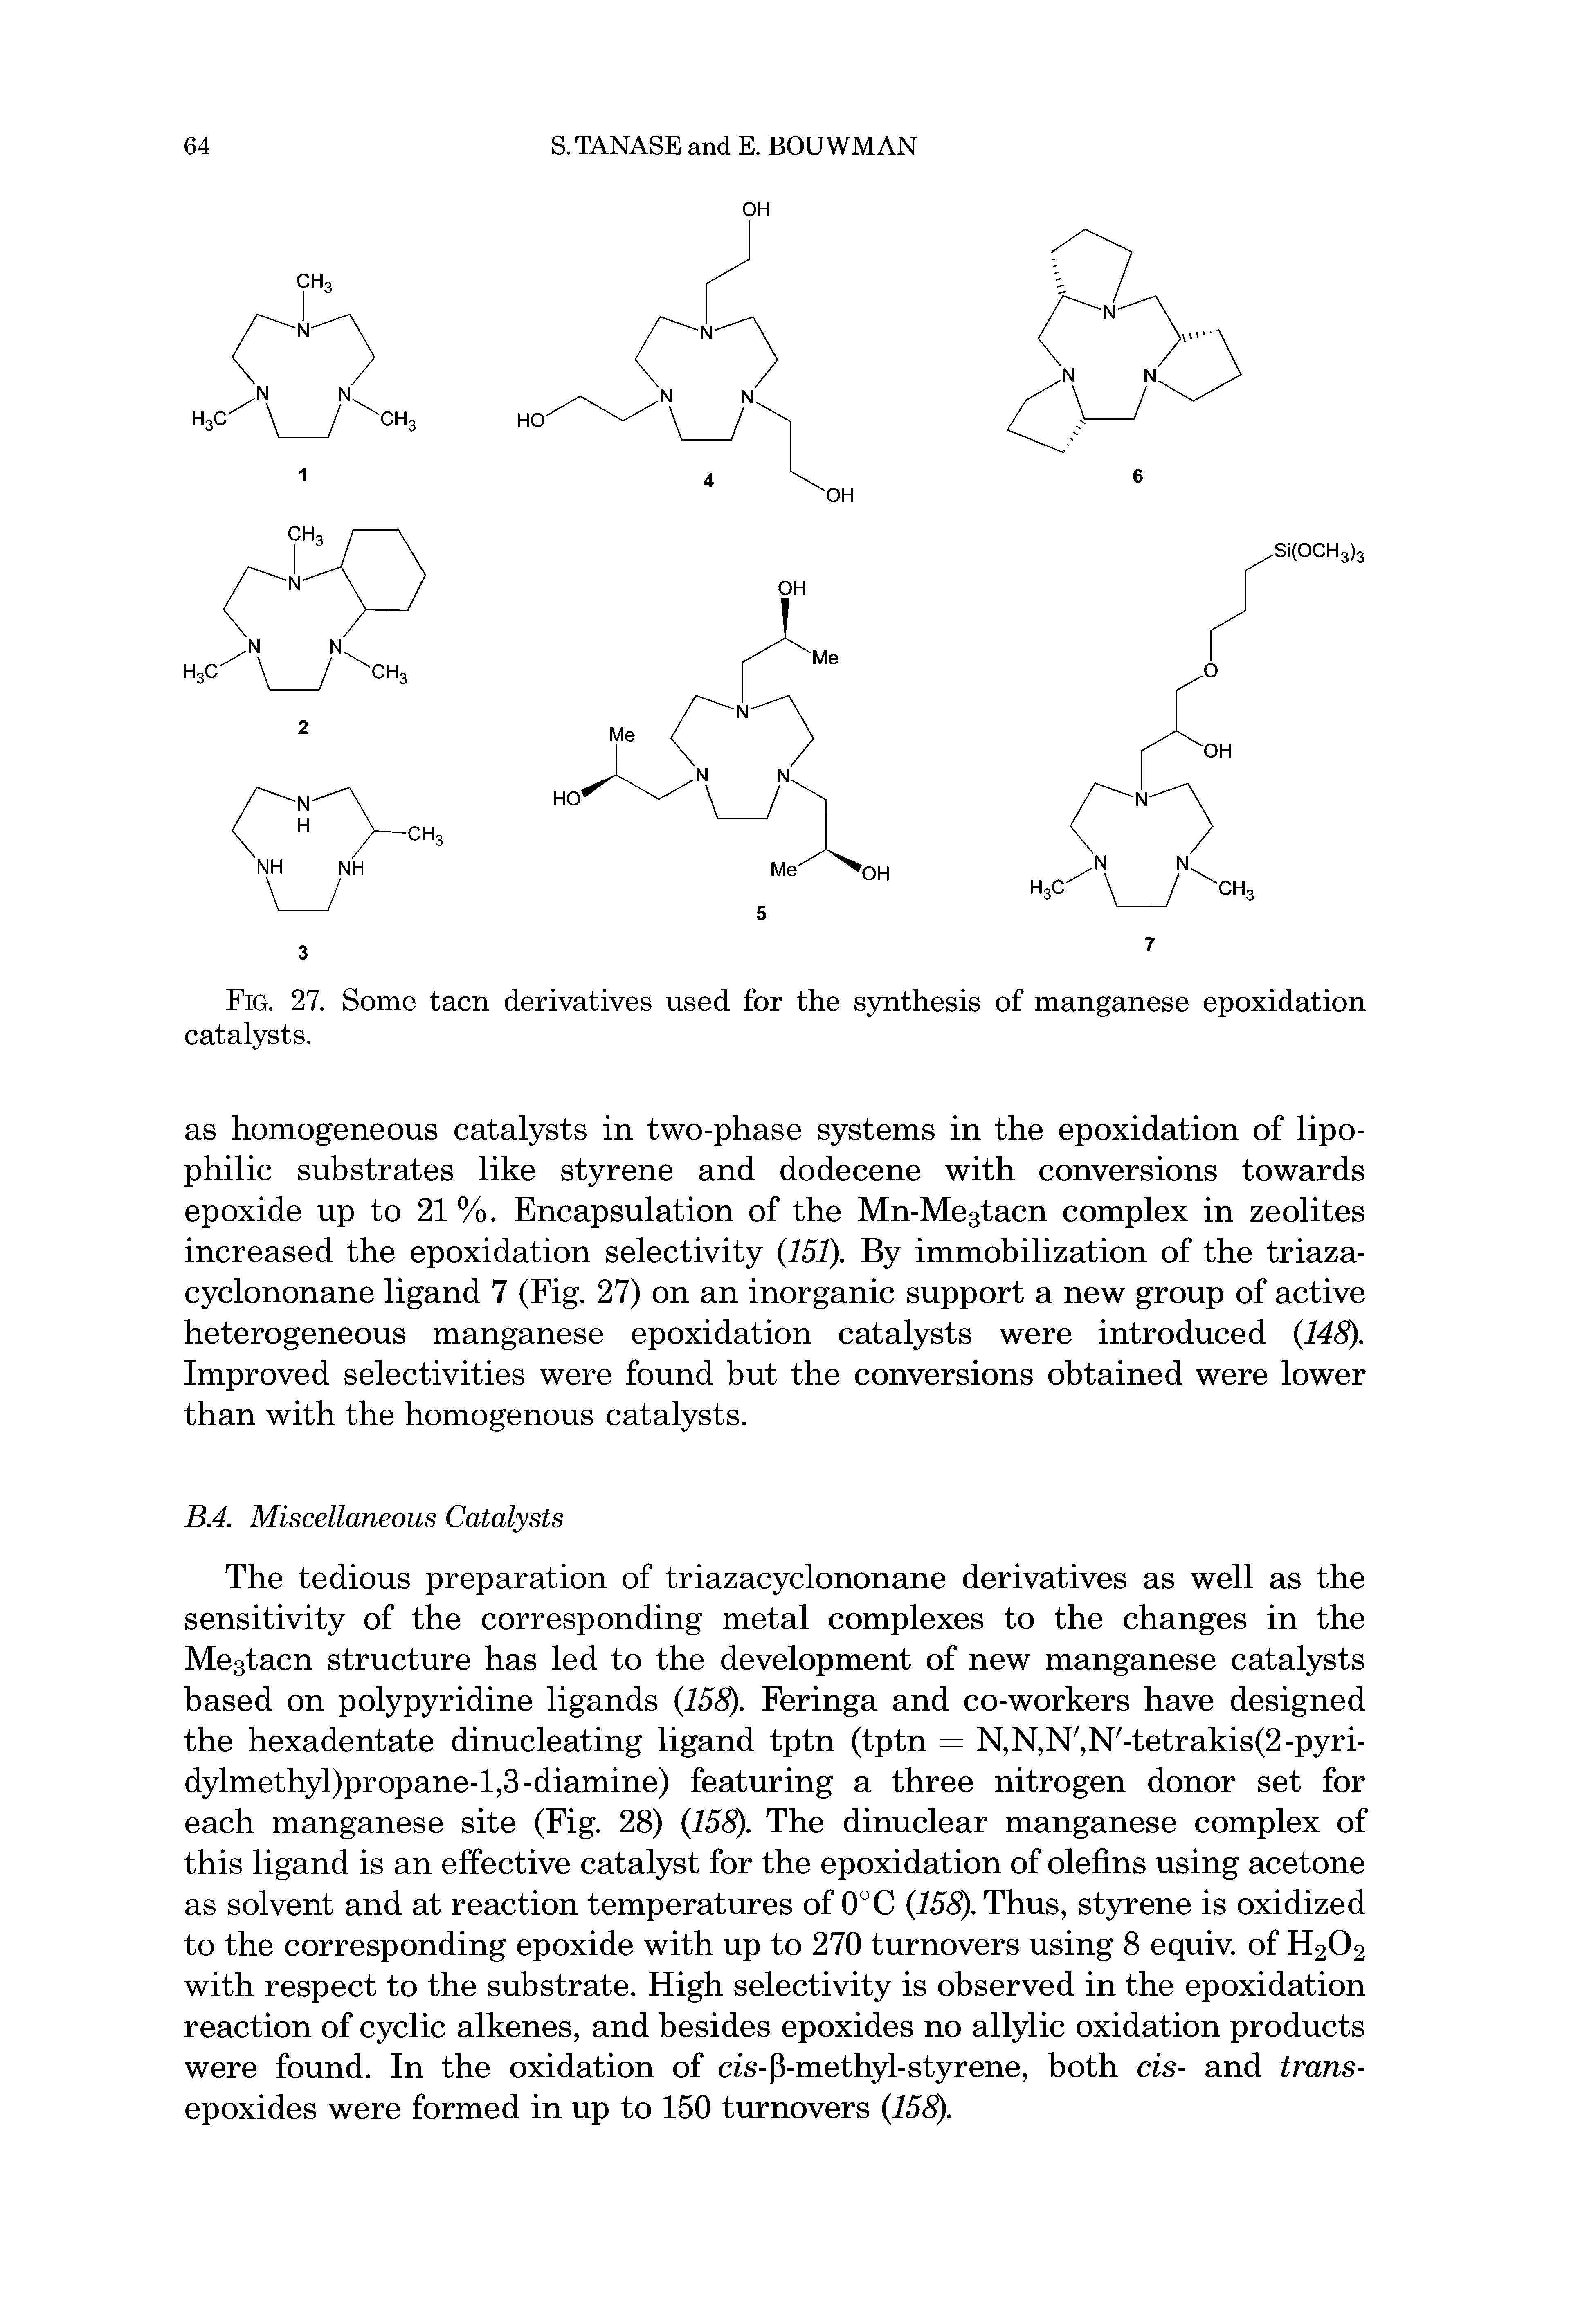 Fig. 27. Some tacn derivatives used for the synthesis of manganese epoxidation catalysts.